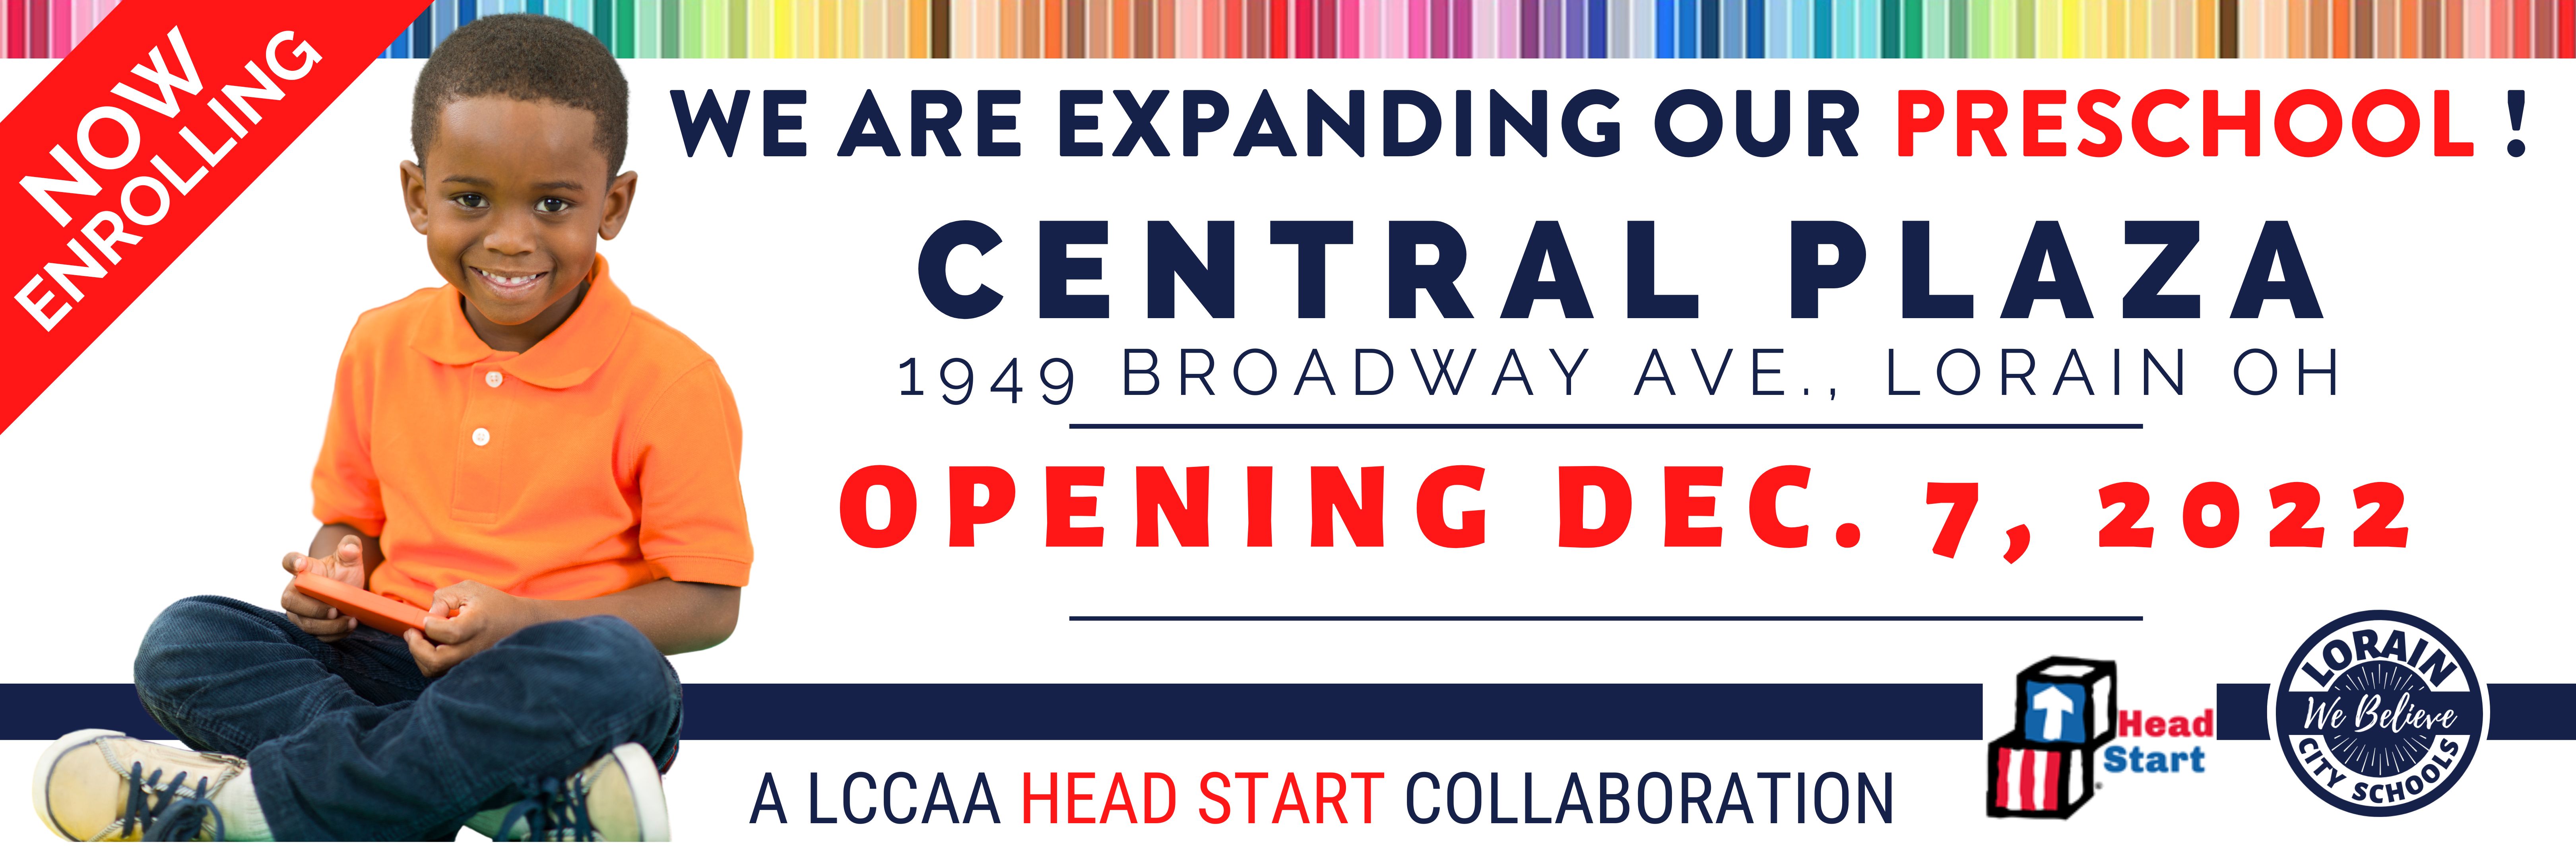 Lorain City Schools, in collaboration with Lorain County Community Action Agency's Head Start program, are excited to announce a new collaborative preschool will open on December 7, 2022, at Central Plaza, 1949 Broadway Avenue in Lorain